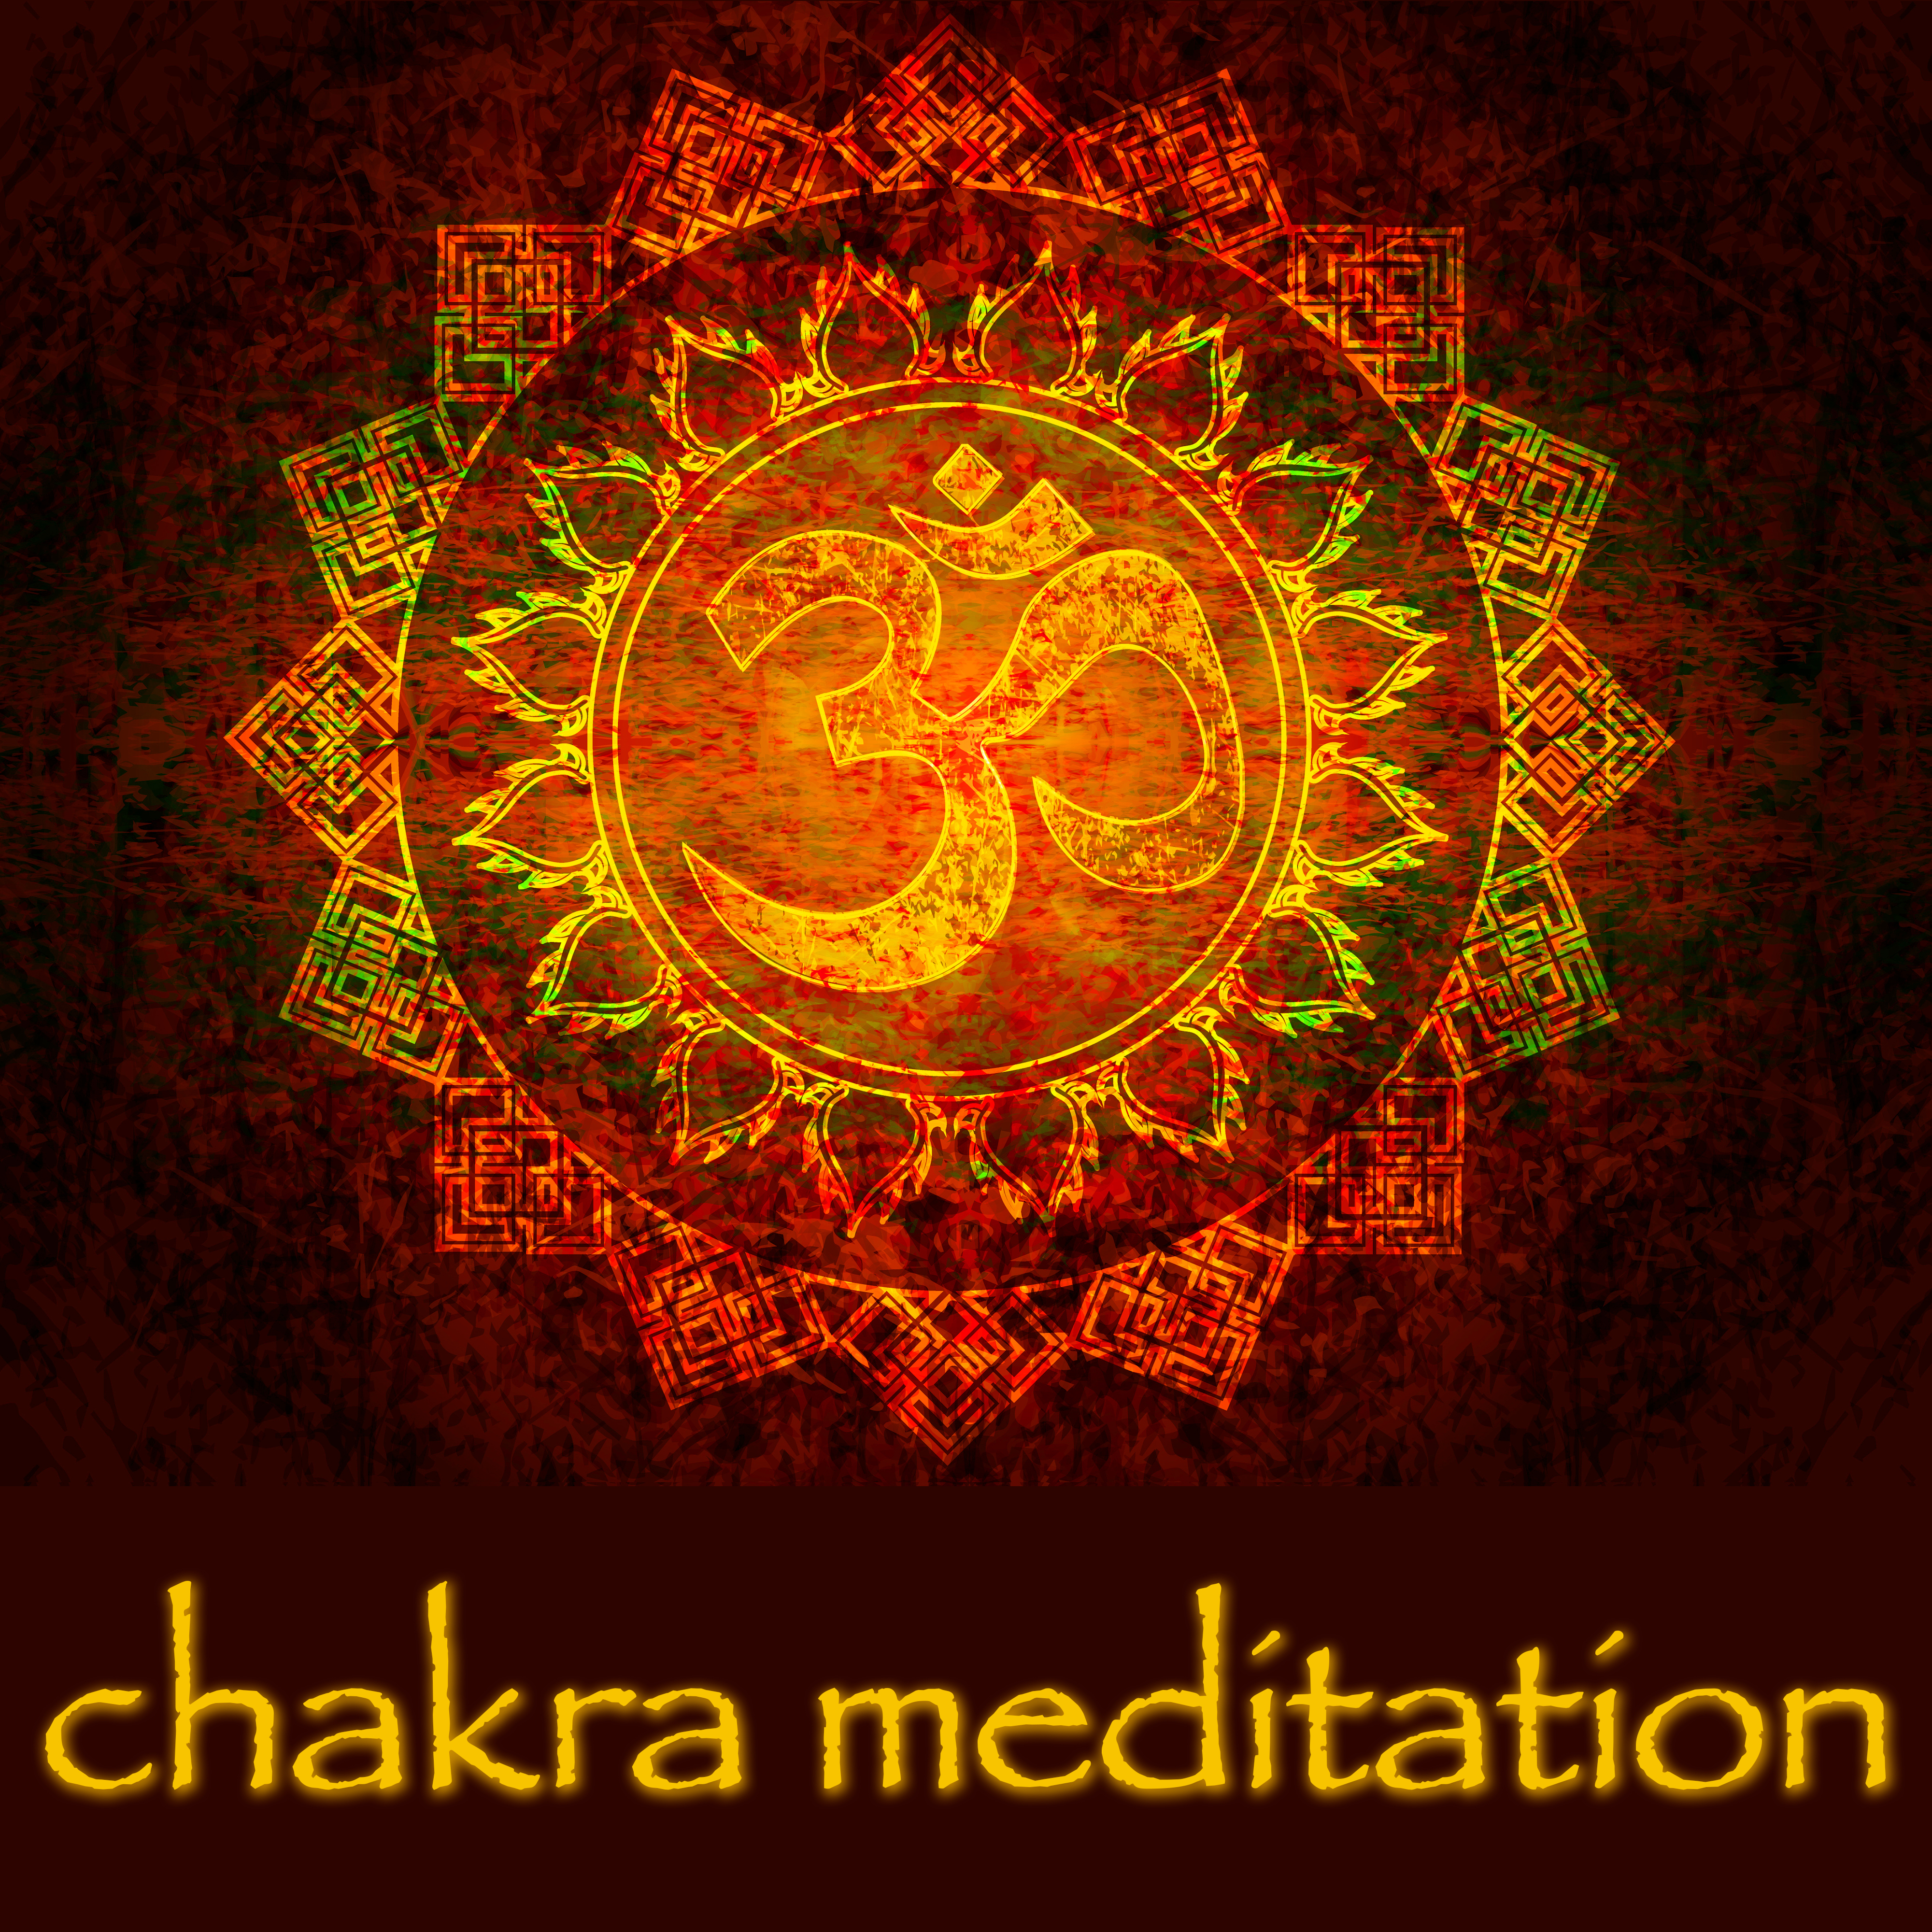 Relaxing Meditation Music for Chakra Cleansing